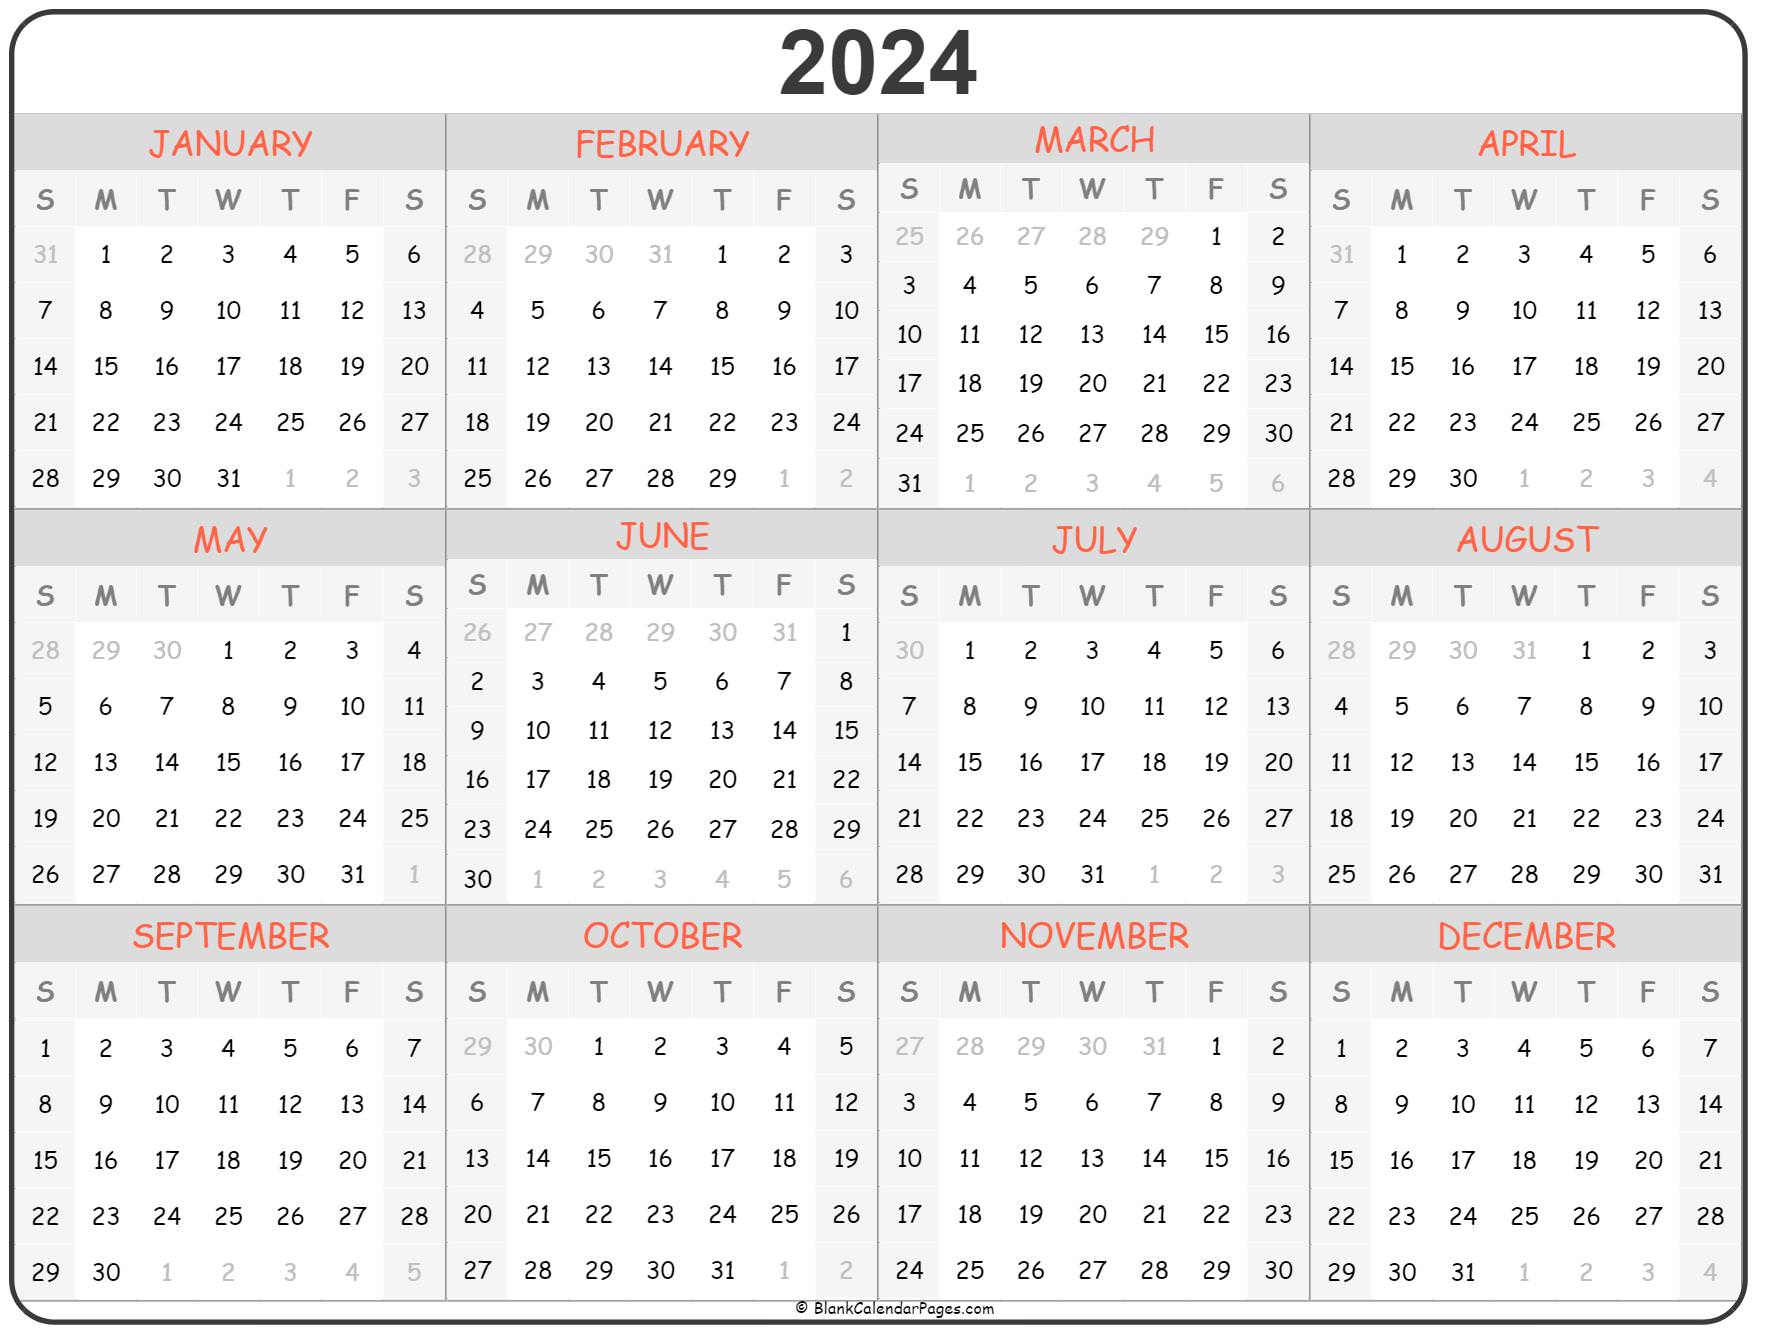 2024 Yearly Calendar With Federal Holidays Printable Latest Top Most Popular Famous Lunar